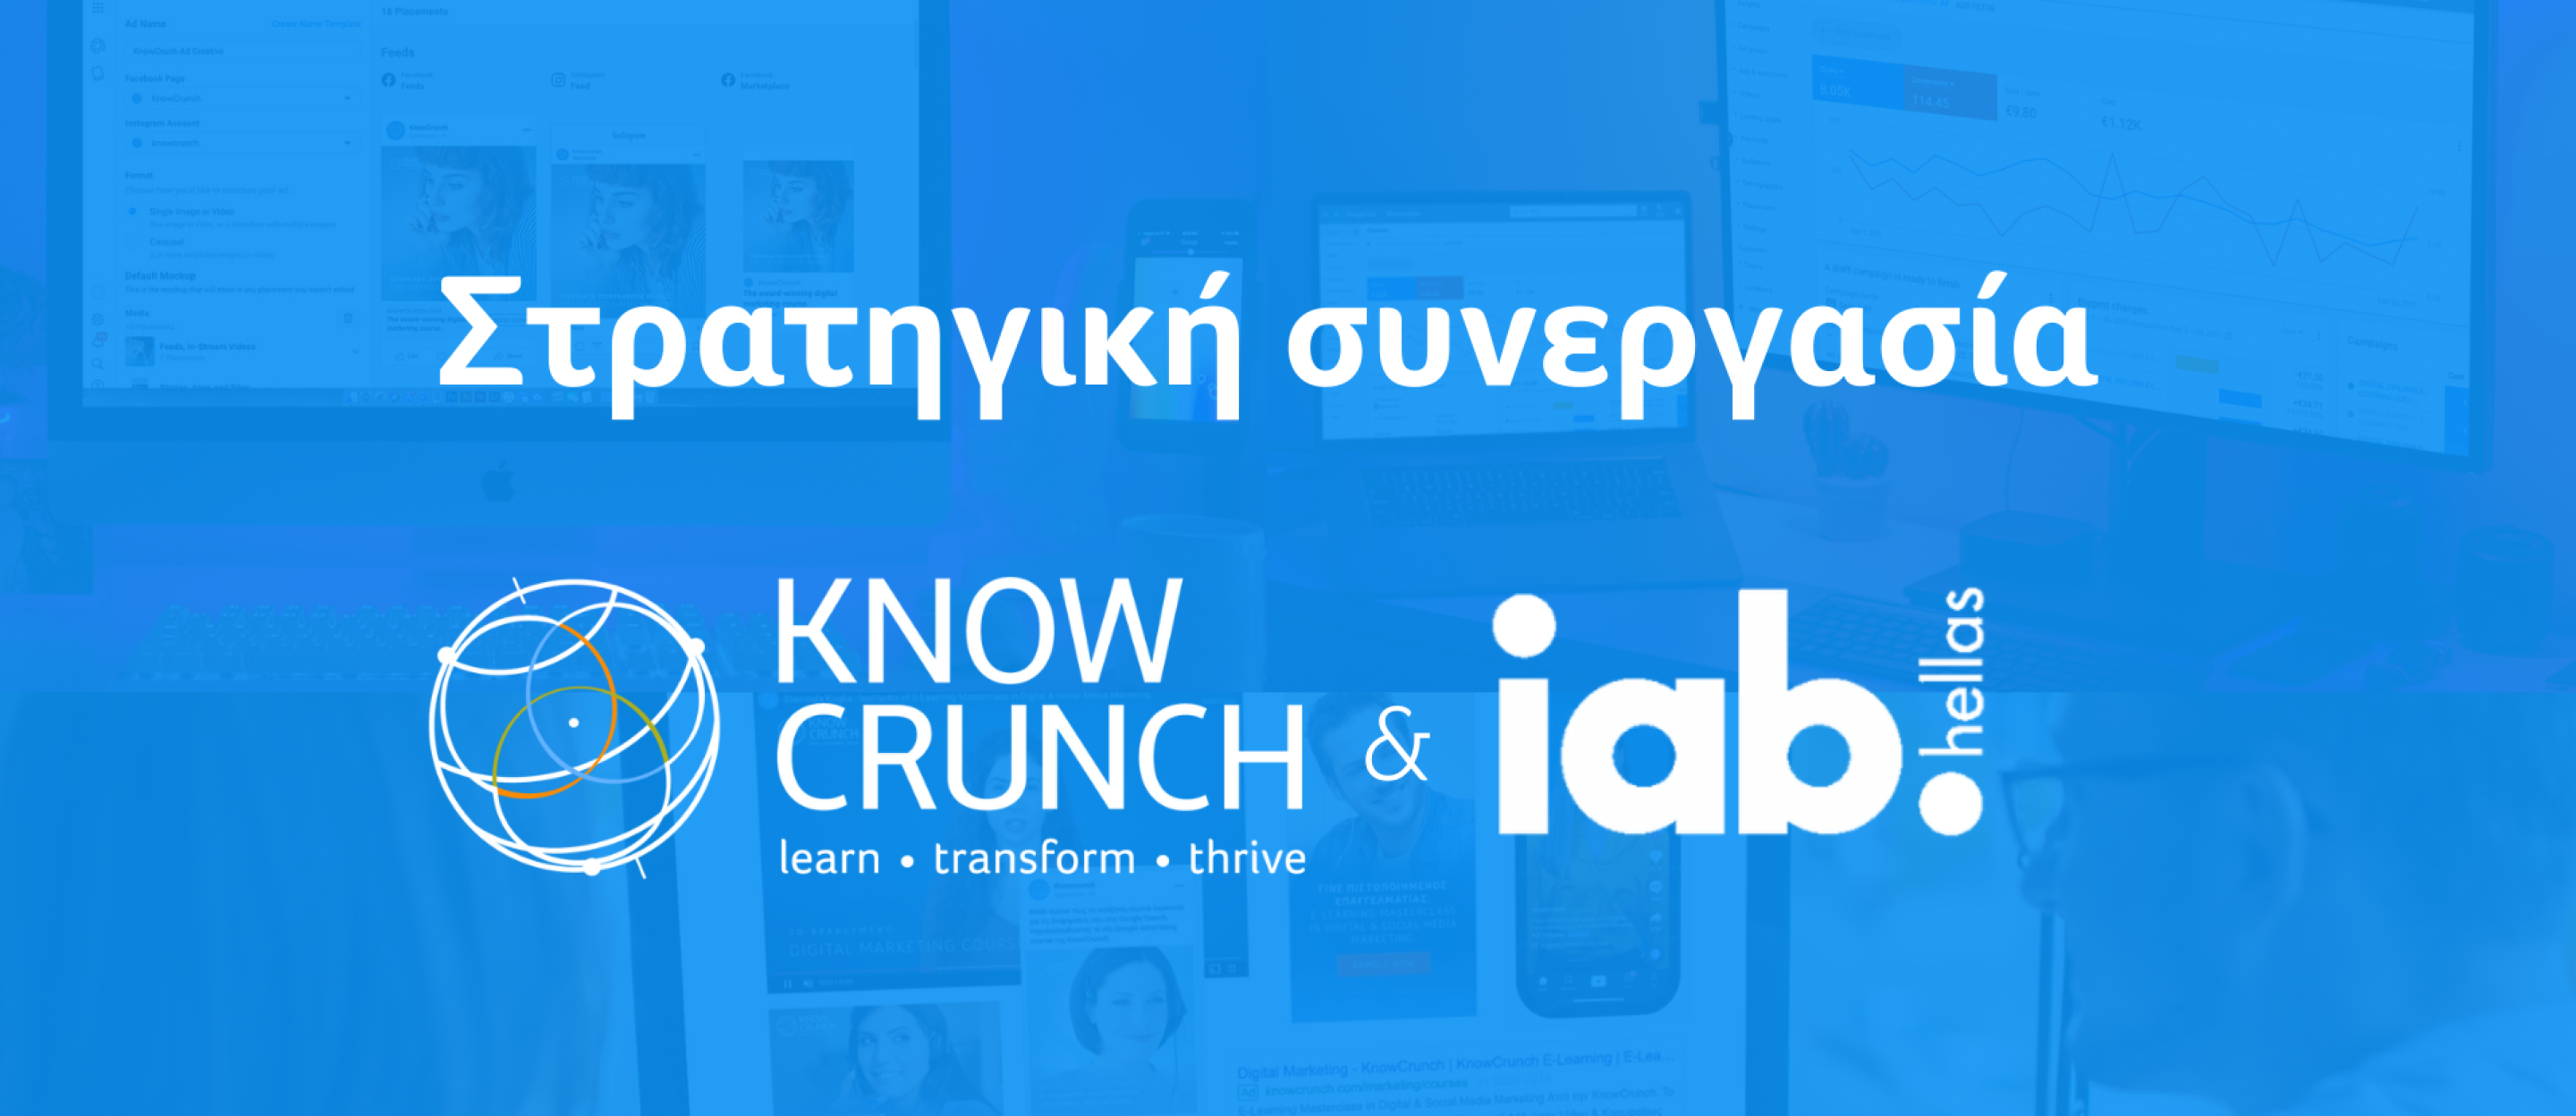 A light blue image that announces the partnership between IAB and Knowcrunch.